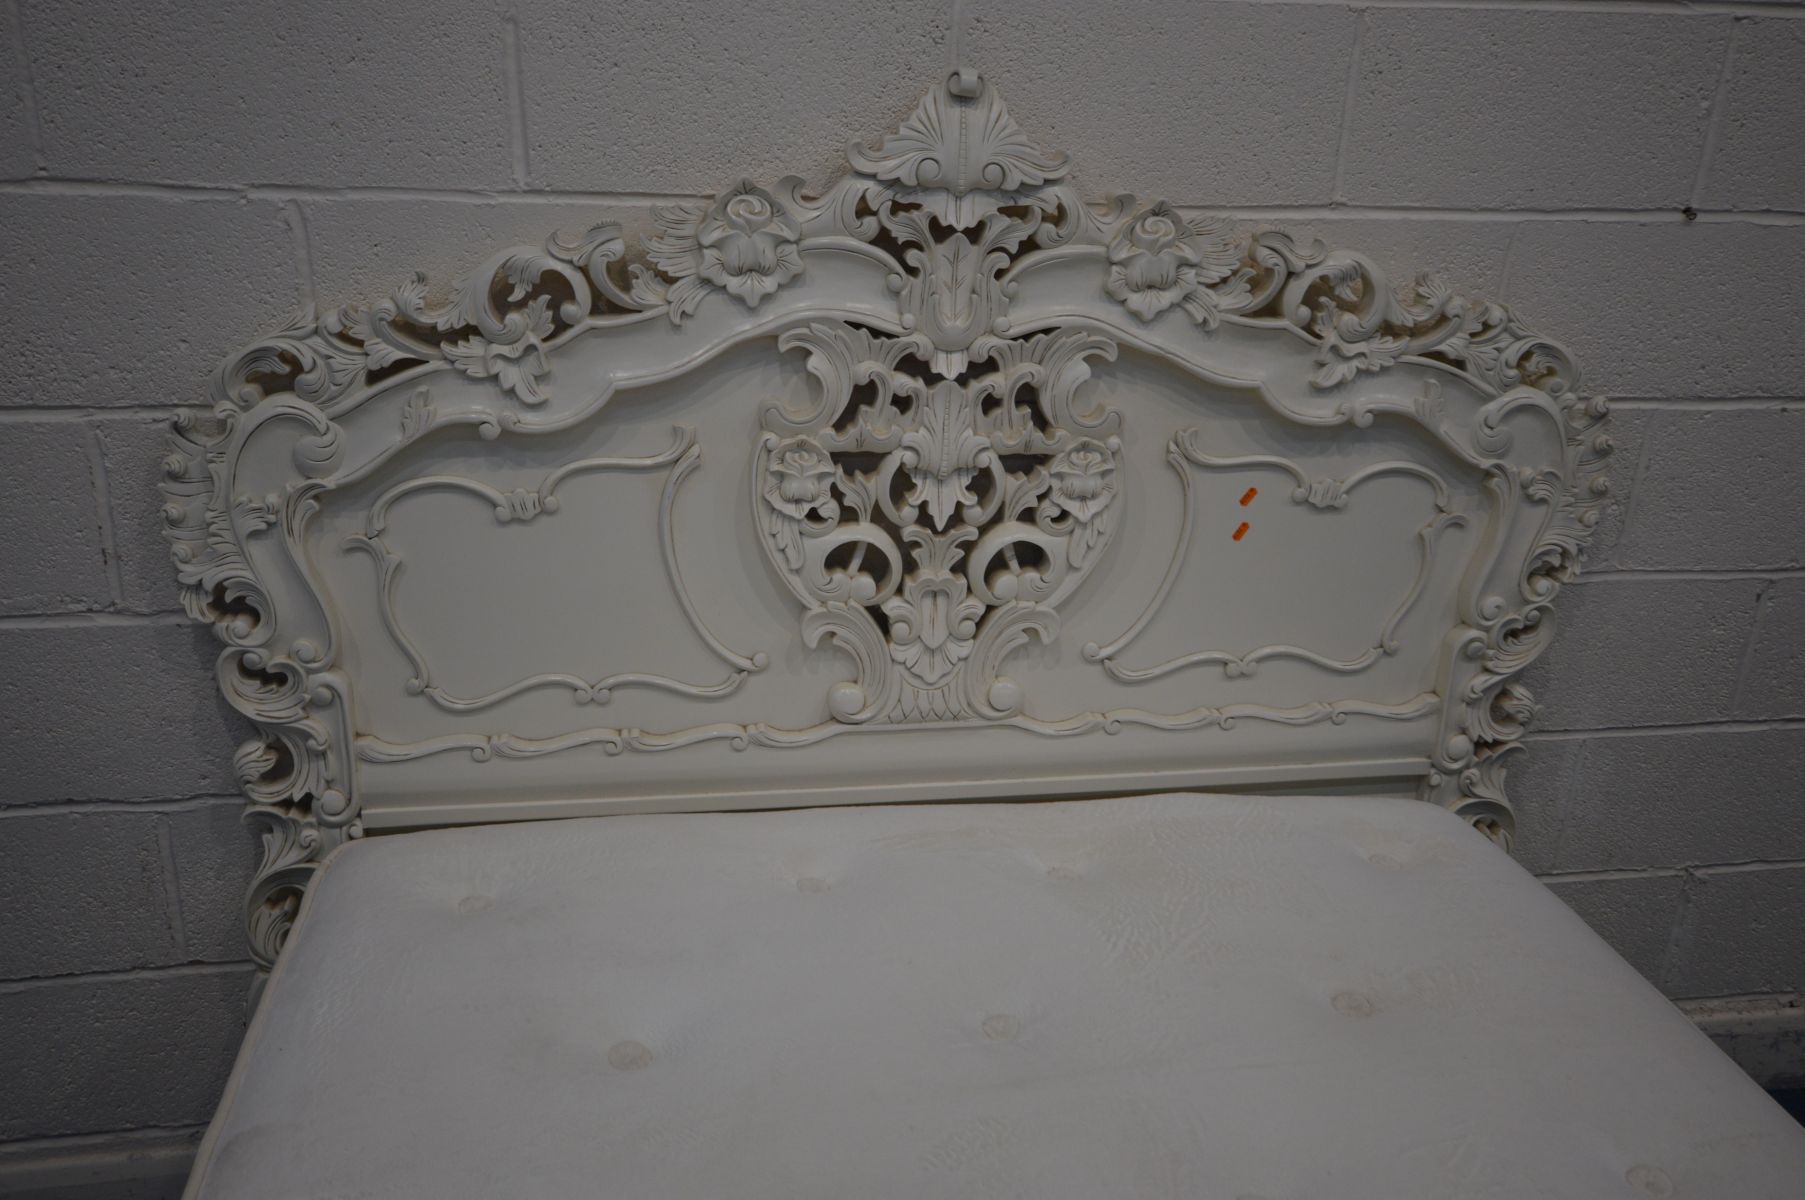 A LATE 20TH CENTURY CREAM PAINTED CONTINENTAL 4FT6 BEDSTEAD, with heavy ornate carved decoration, - Image 3 of 4